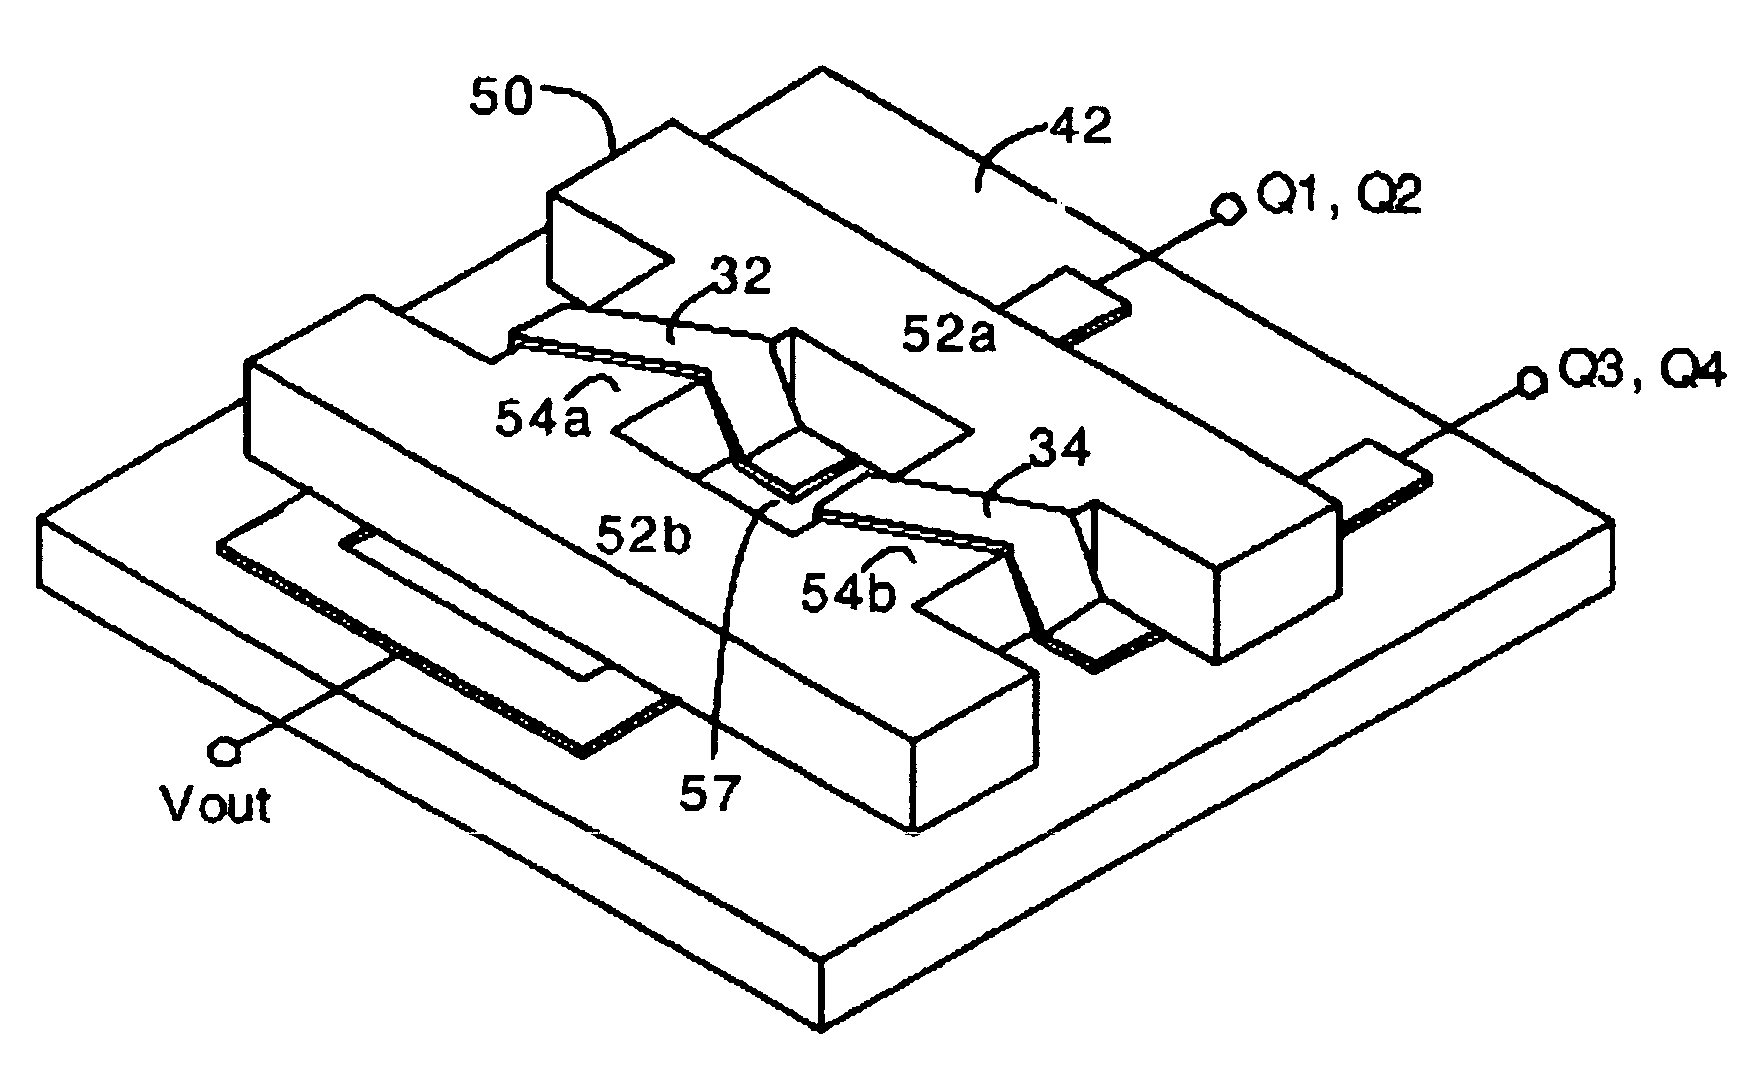 Multiphase voltage regulator having coupled inductors with reduced winding resistance